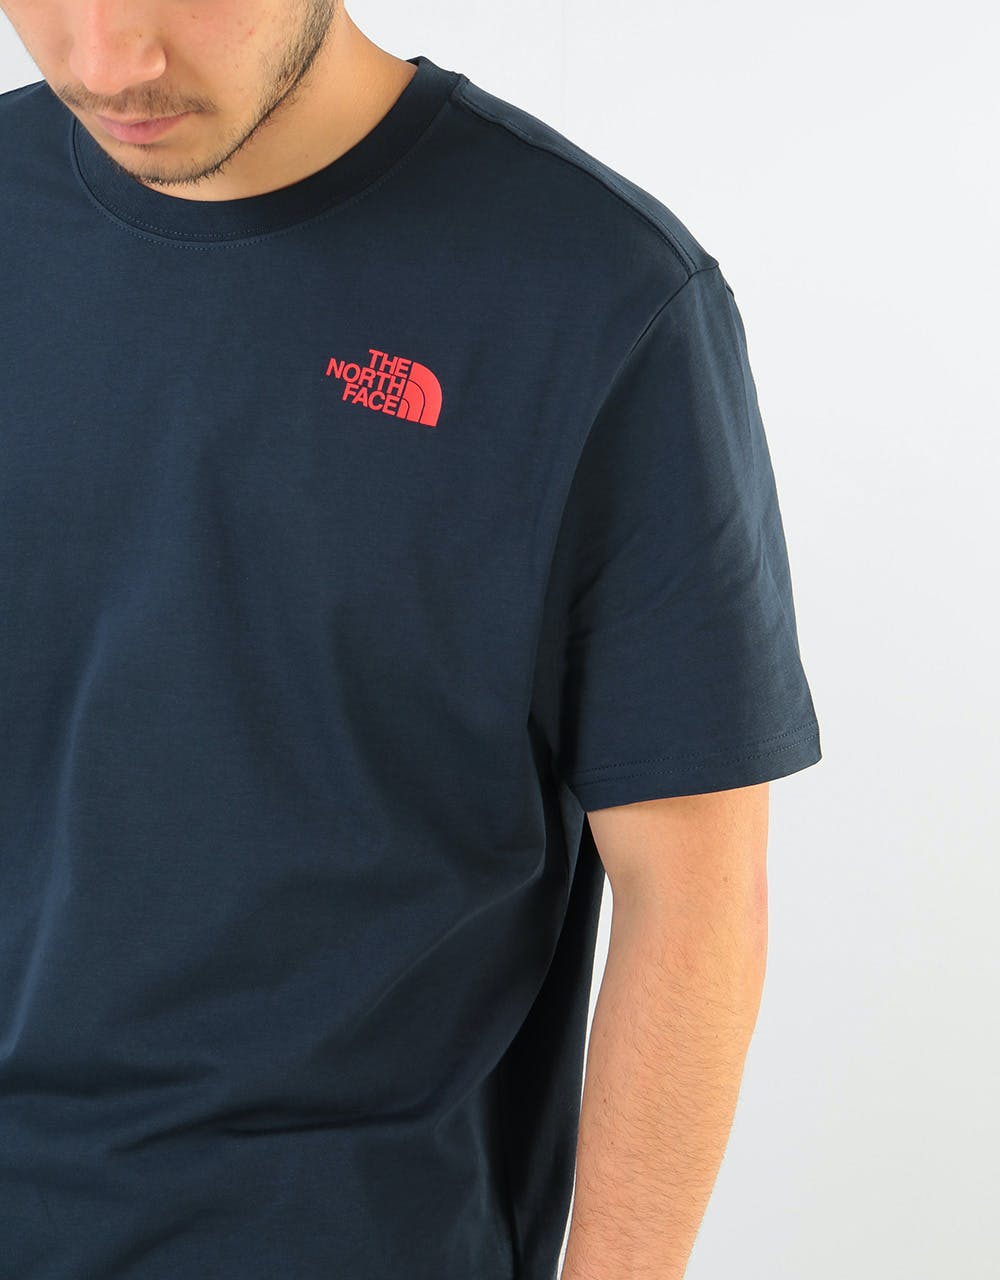 The North Face S/S Red Box T-Shirt - Urban Navy/Fiery Red